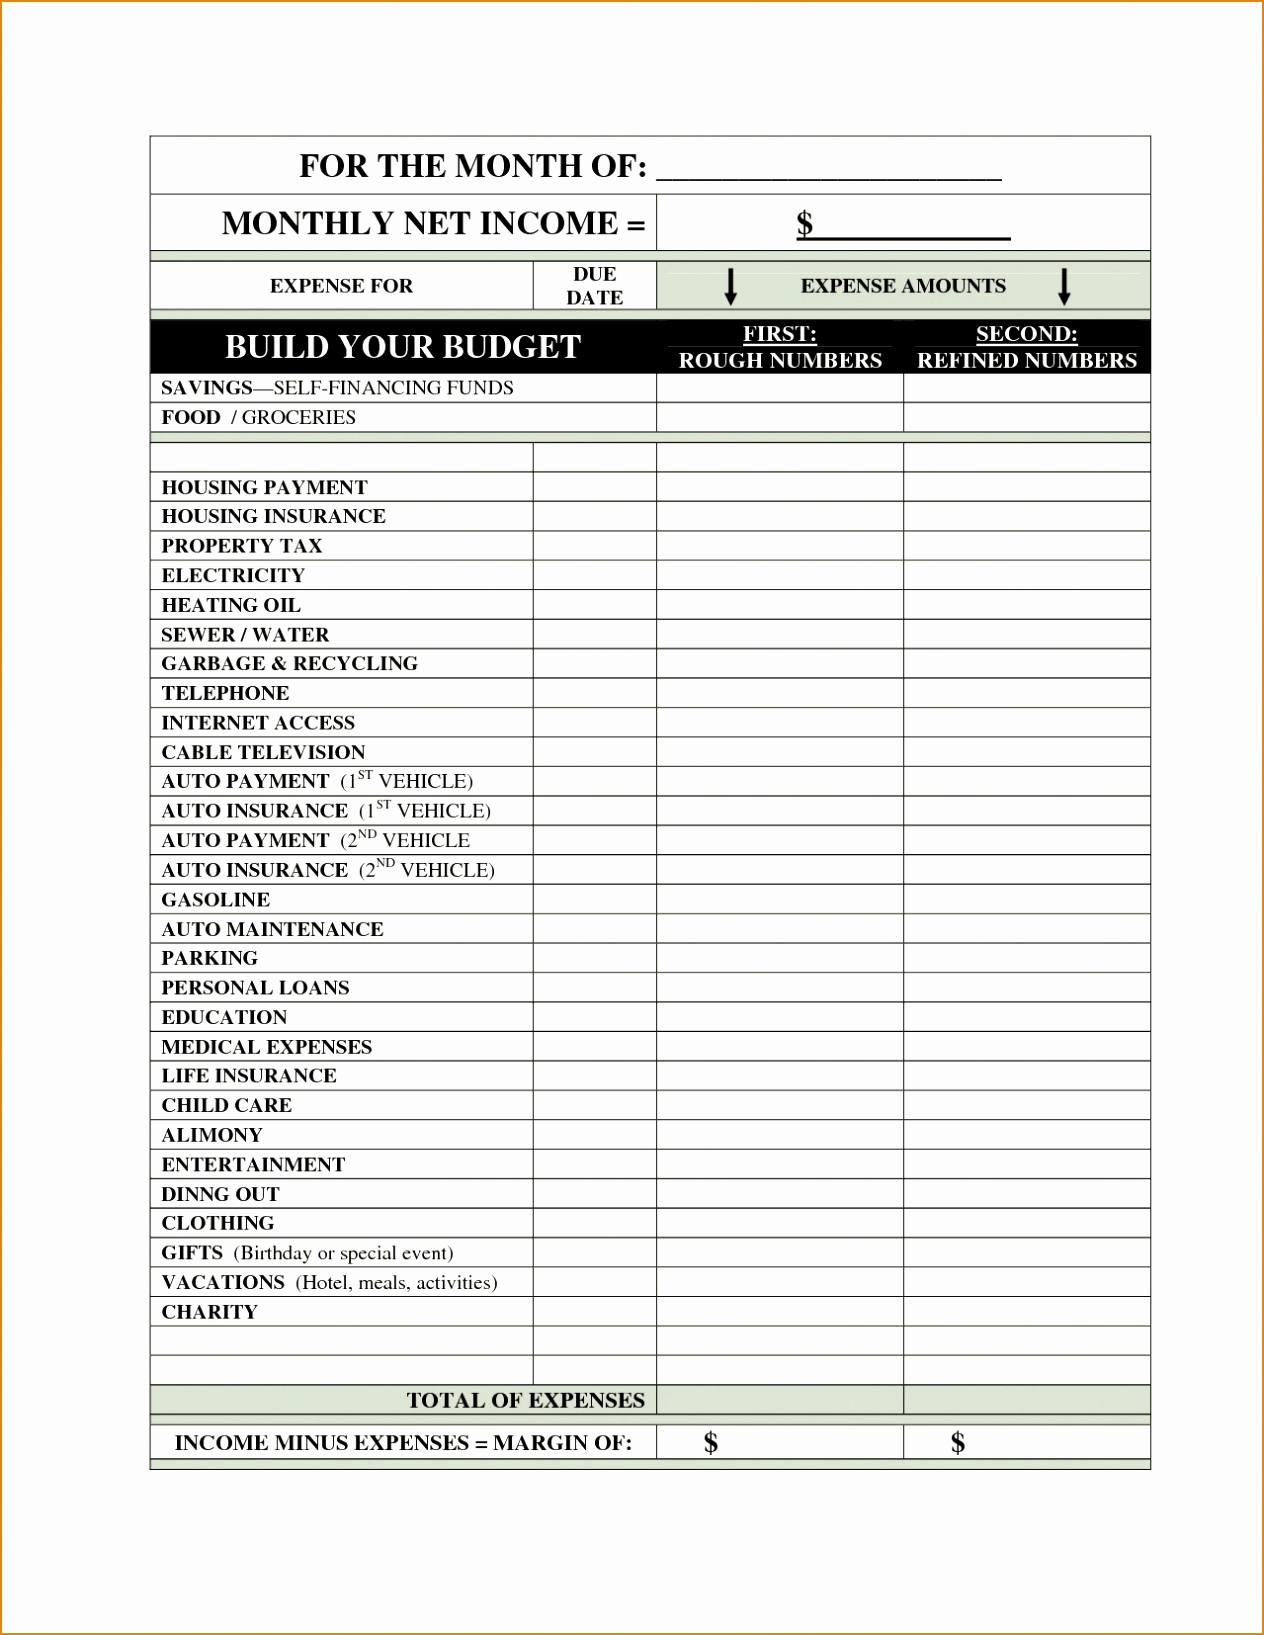 12-best-images-of-federal-income-tax-deduction-worksheet-2014